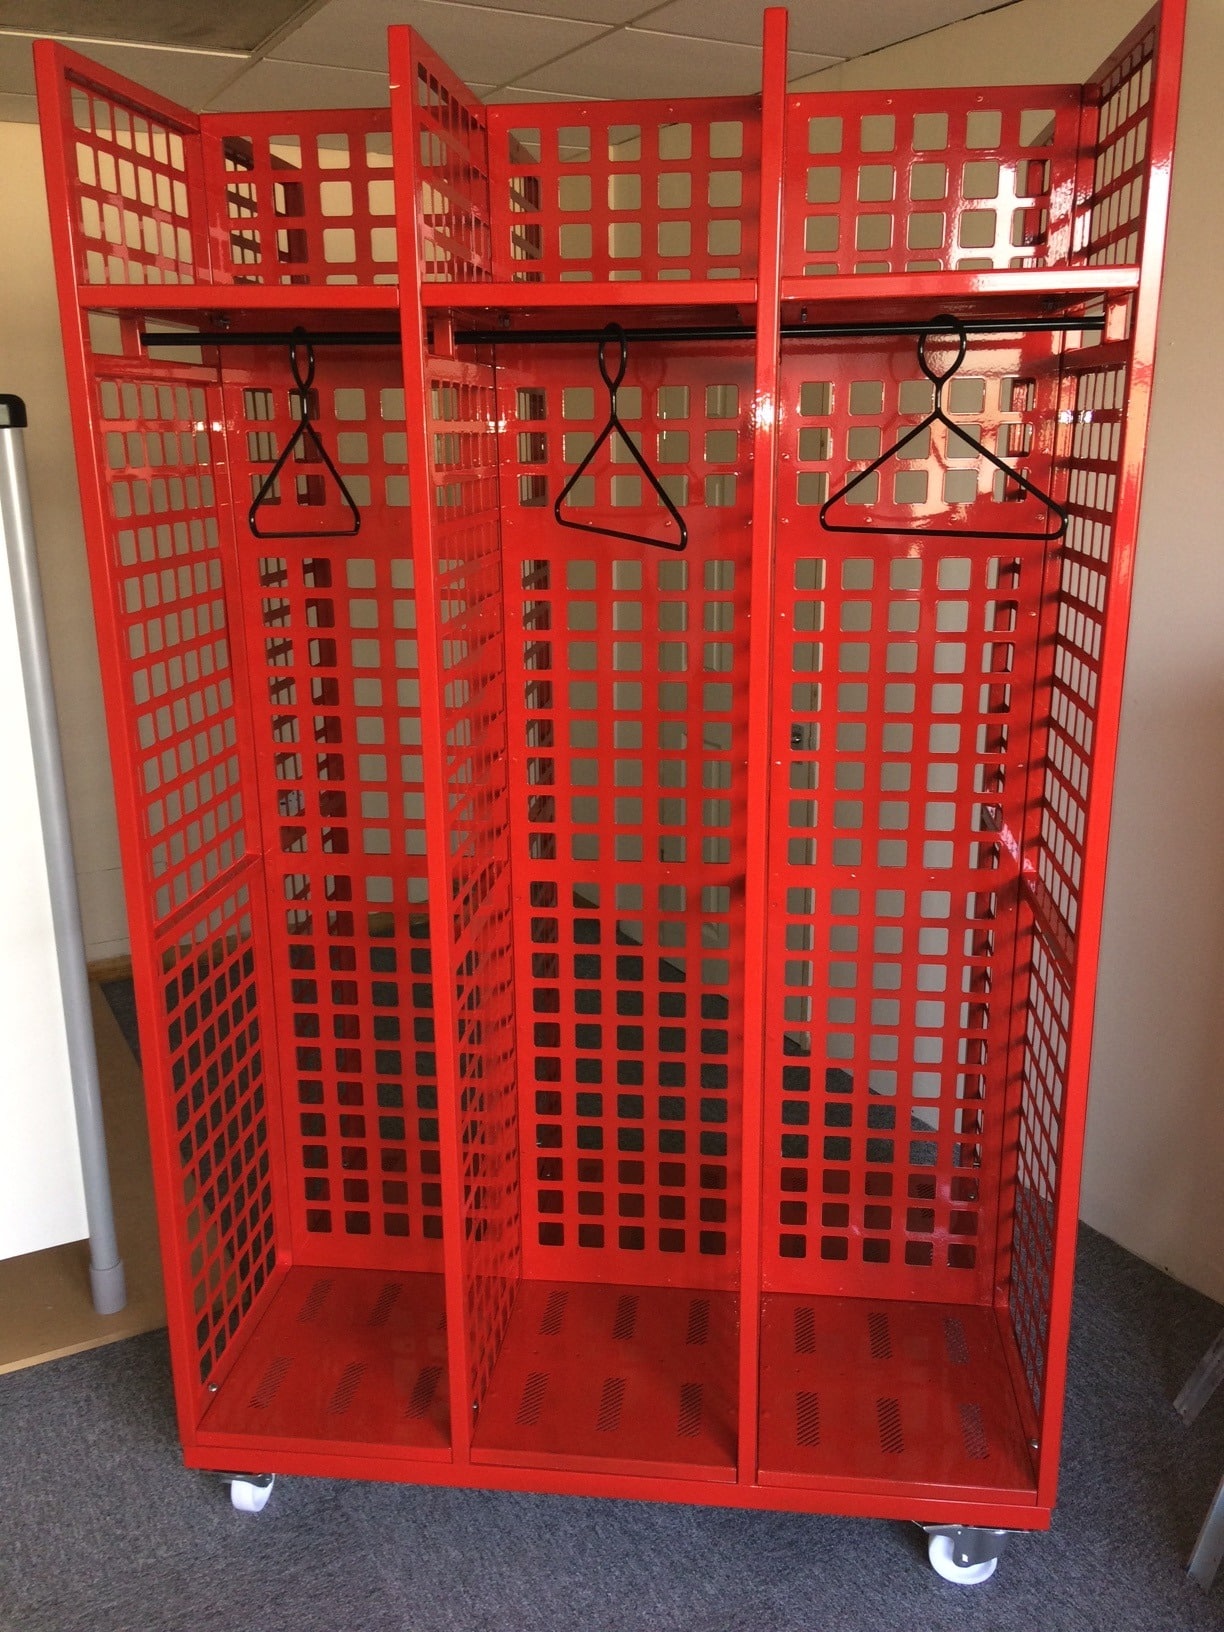 Rescue Turnout Gear Storage Racks, Shelving Rack And Lockers